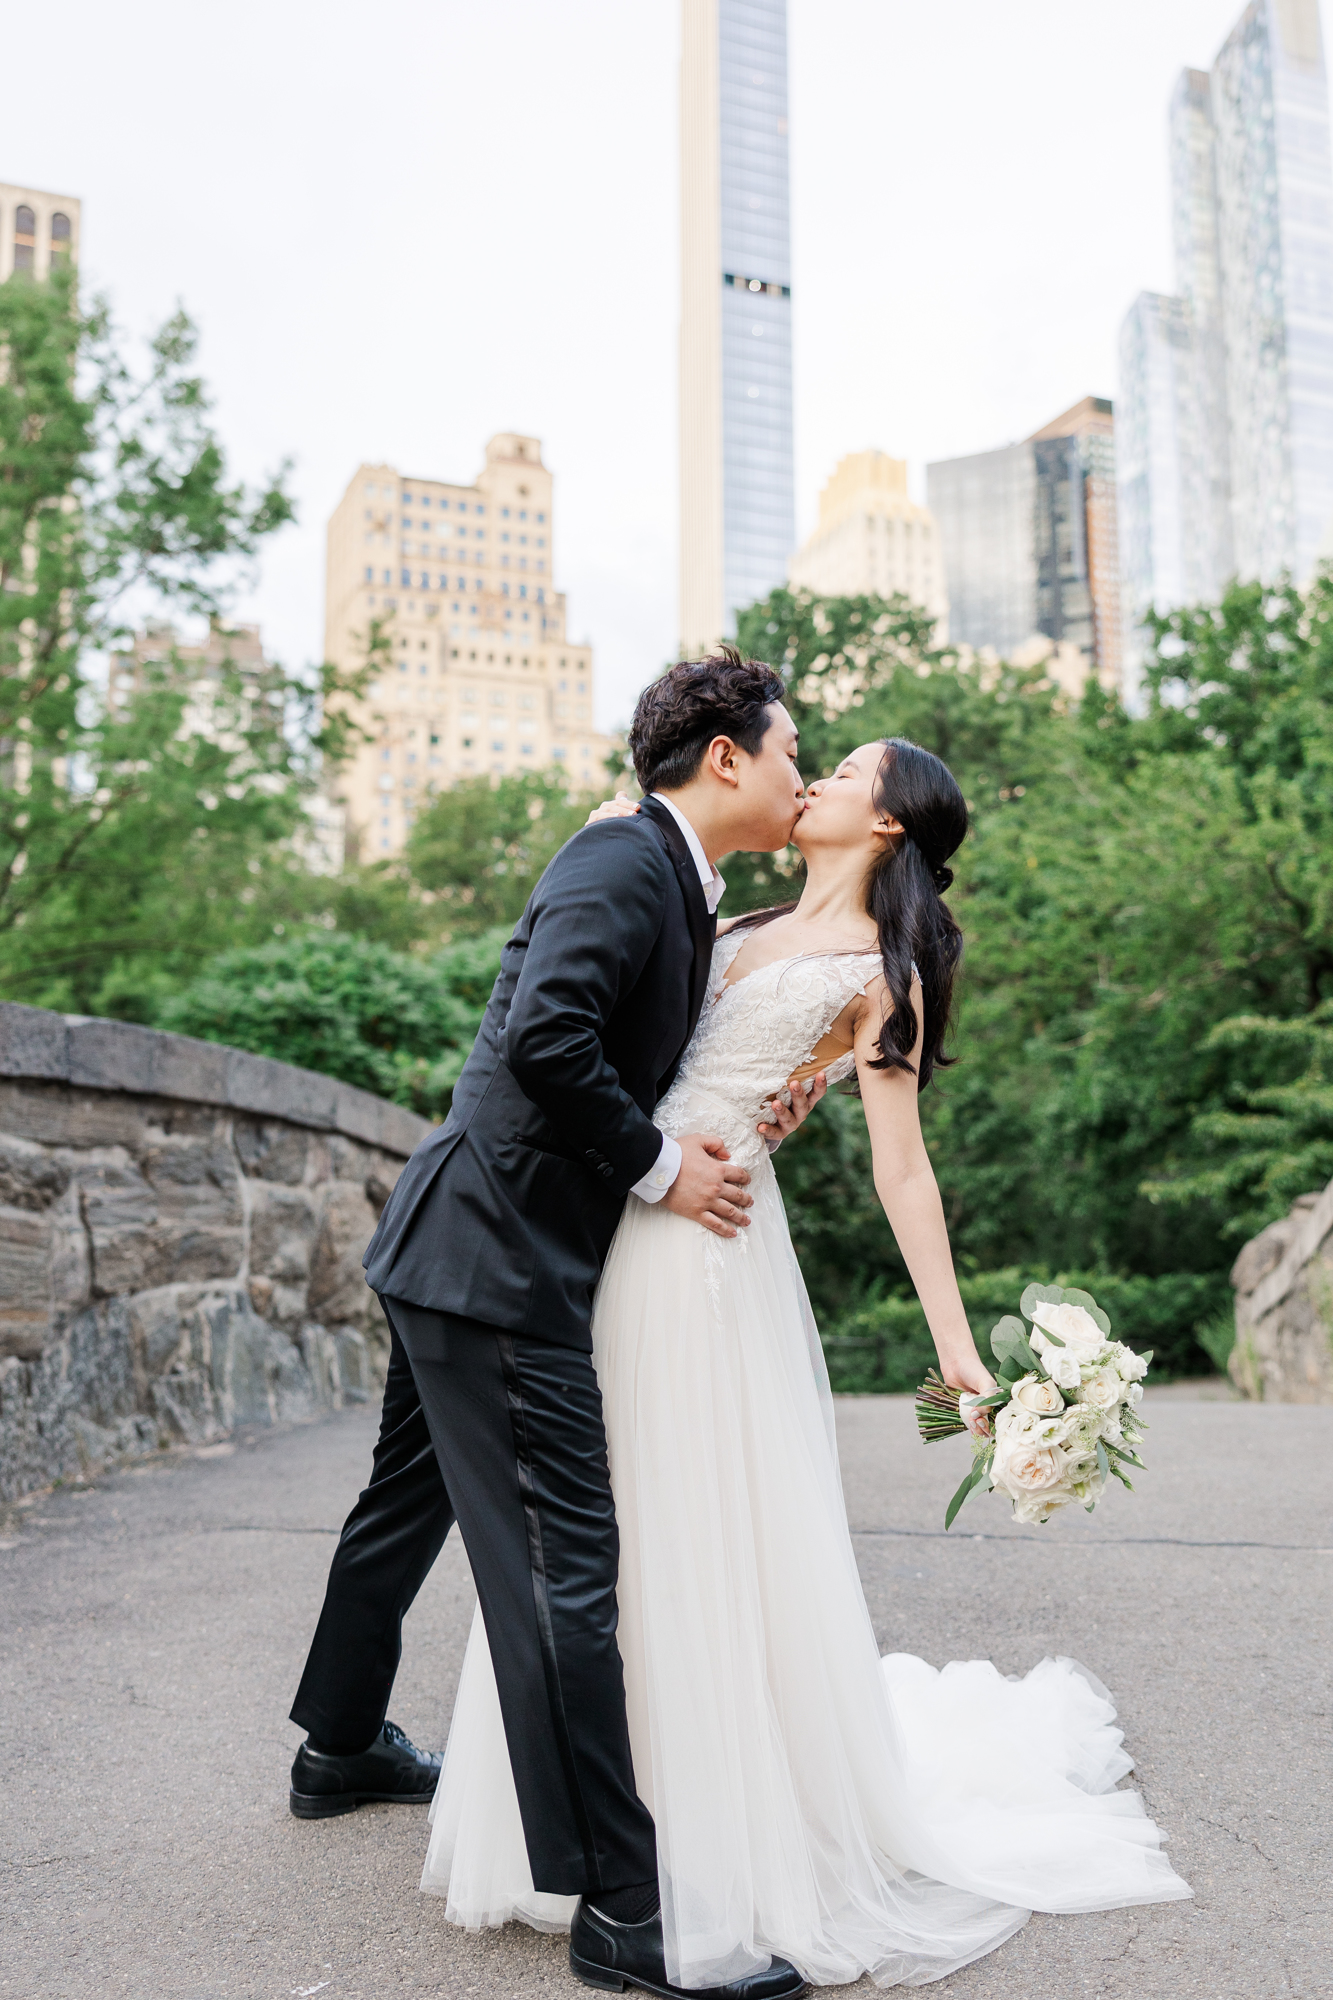 Scenic Summer Morning Elopement Photos in Central Park New York